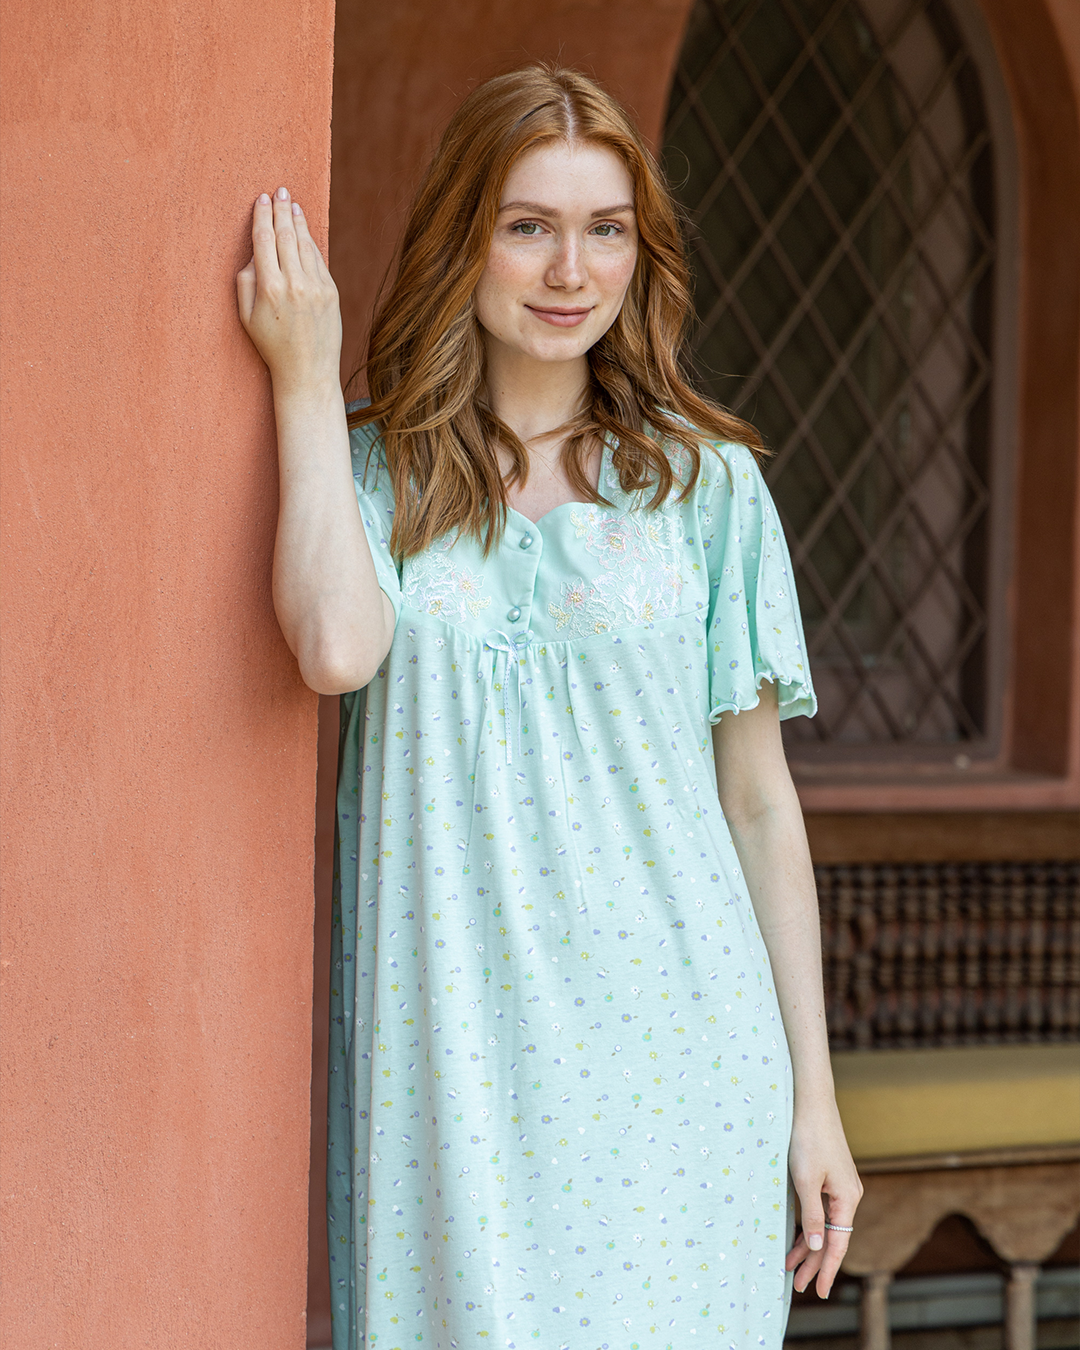 Women's shirt, half-sleeved, with lace buttons